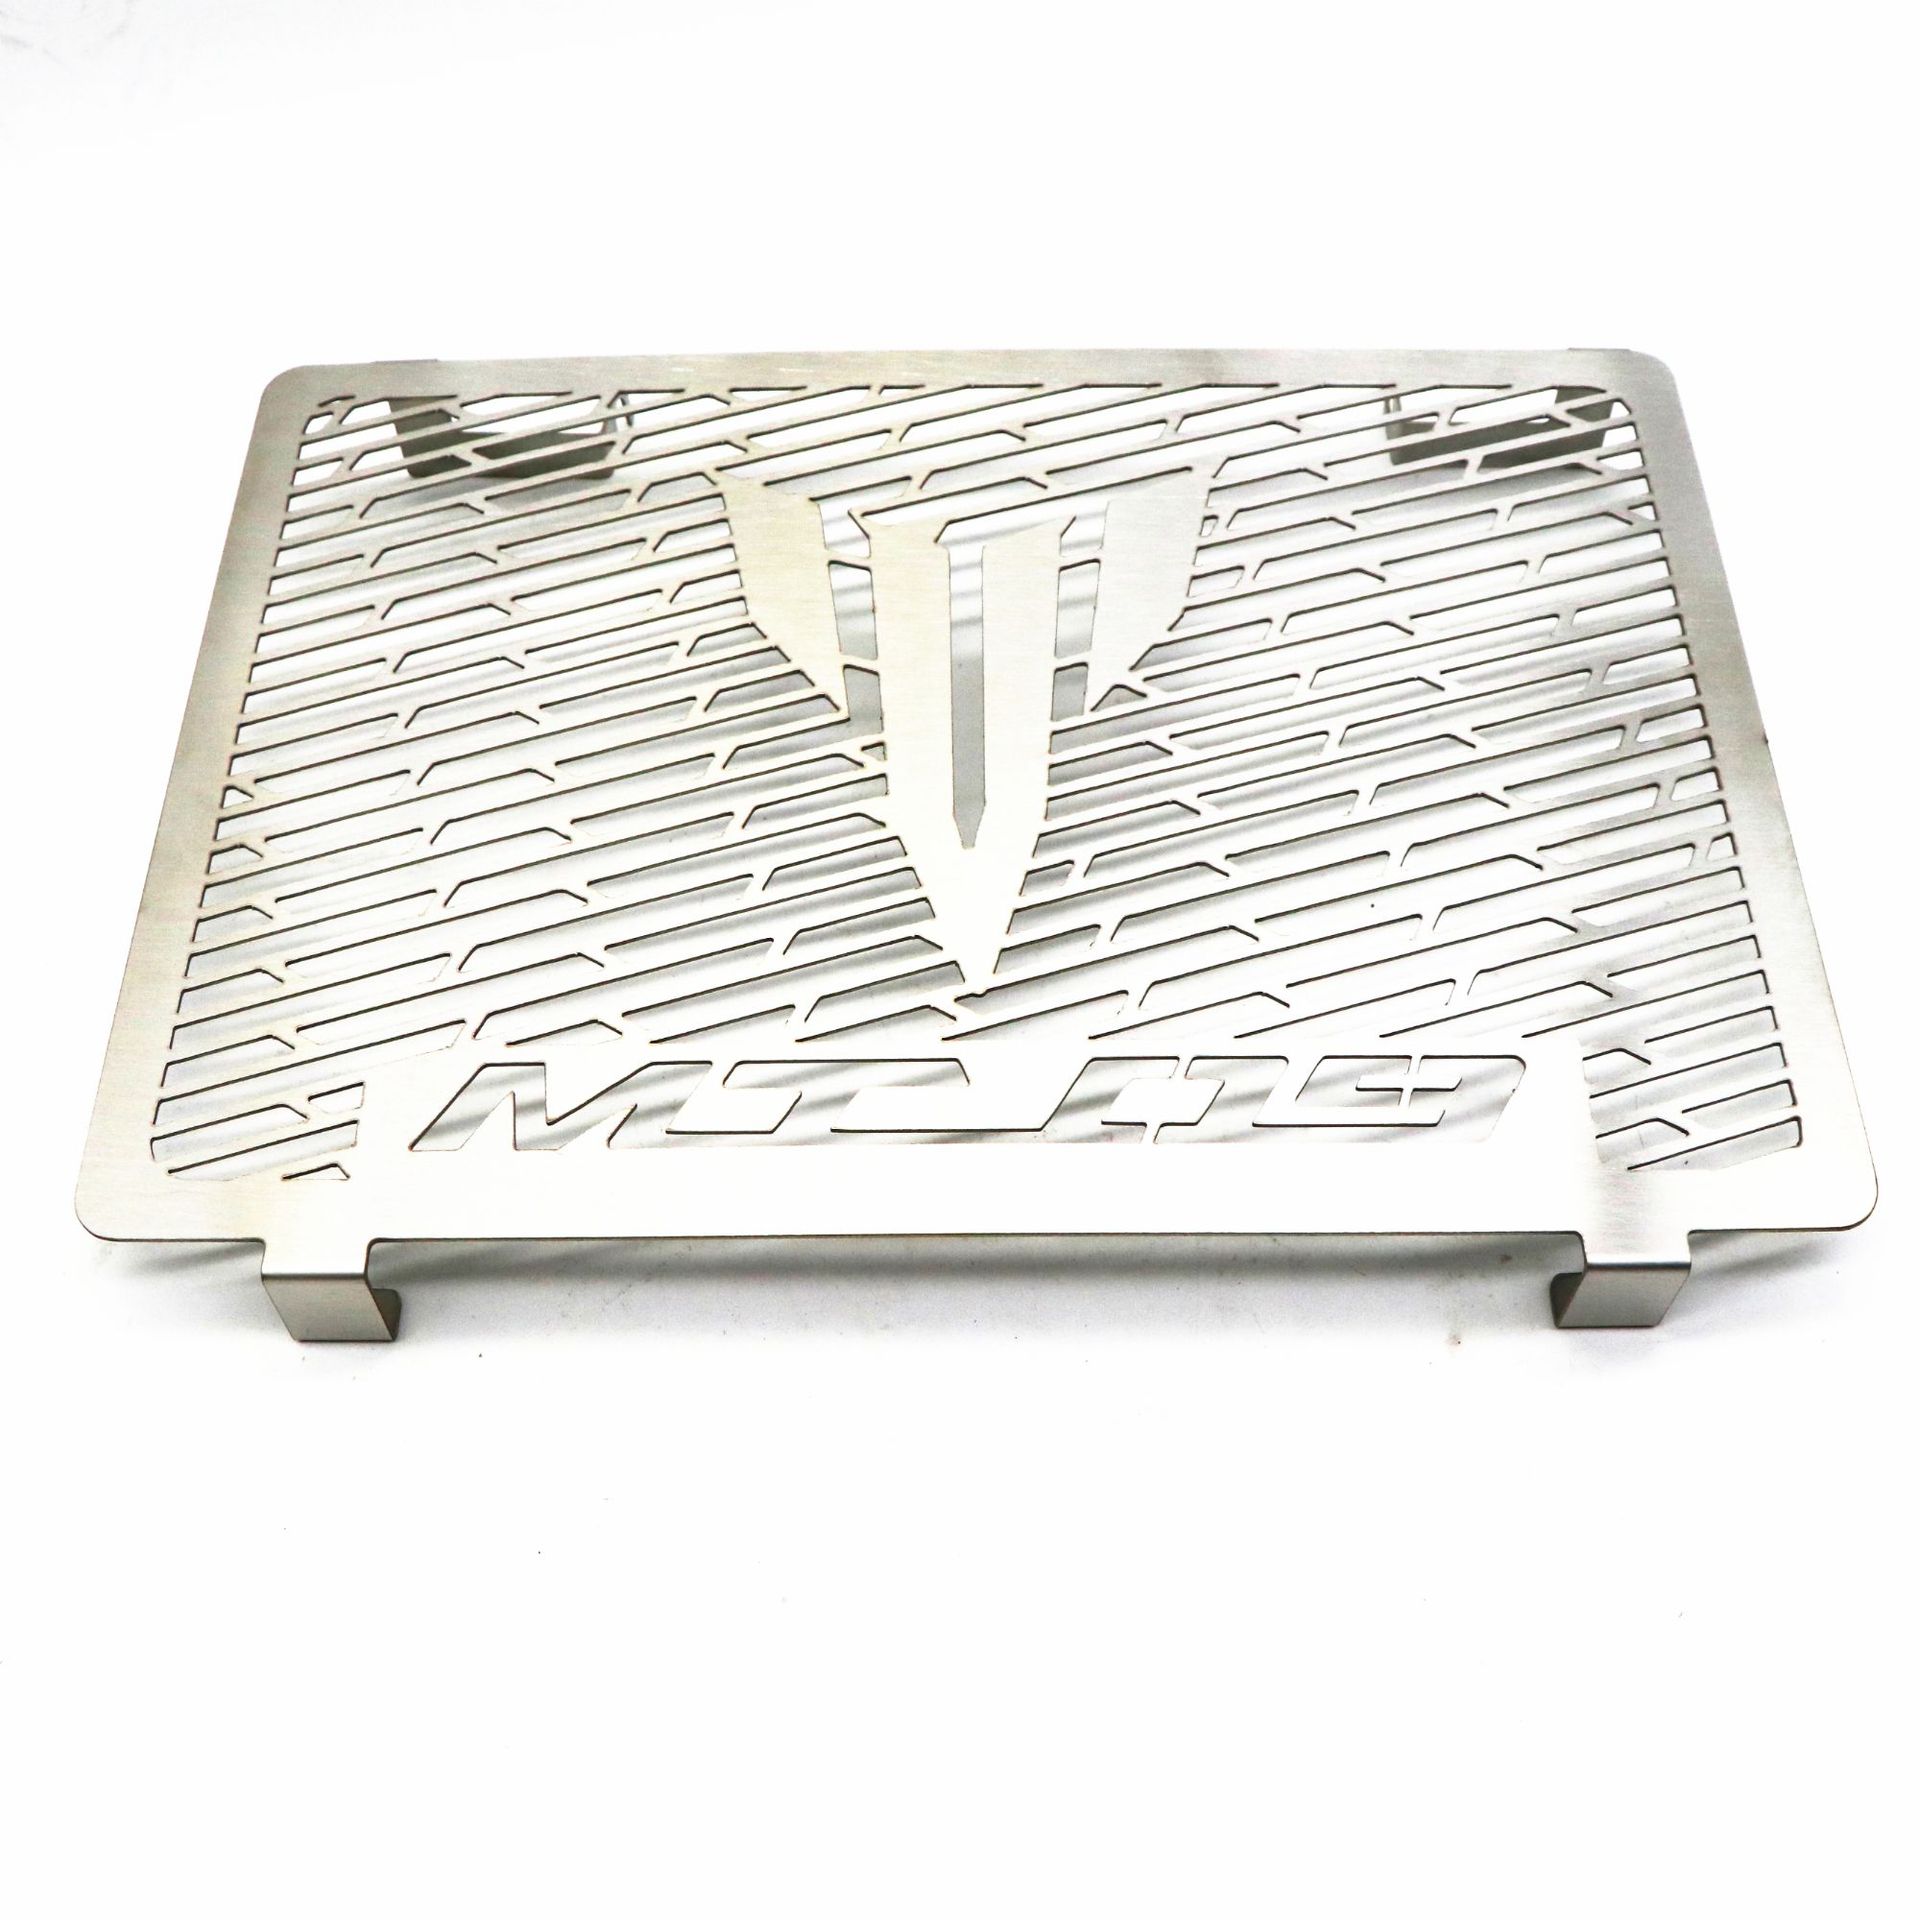 Stainless Steel Motorcycle Radiator Guard Radiator Cover Fits For Yamaha MT-09 MT09 14-17 silver